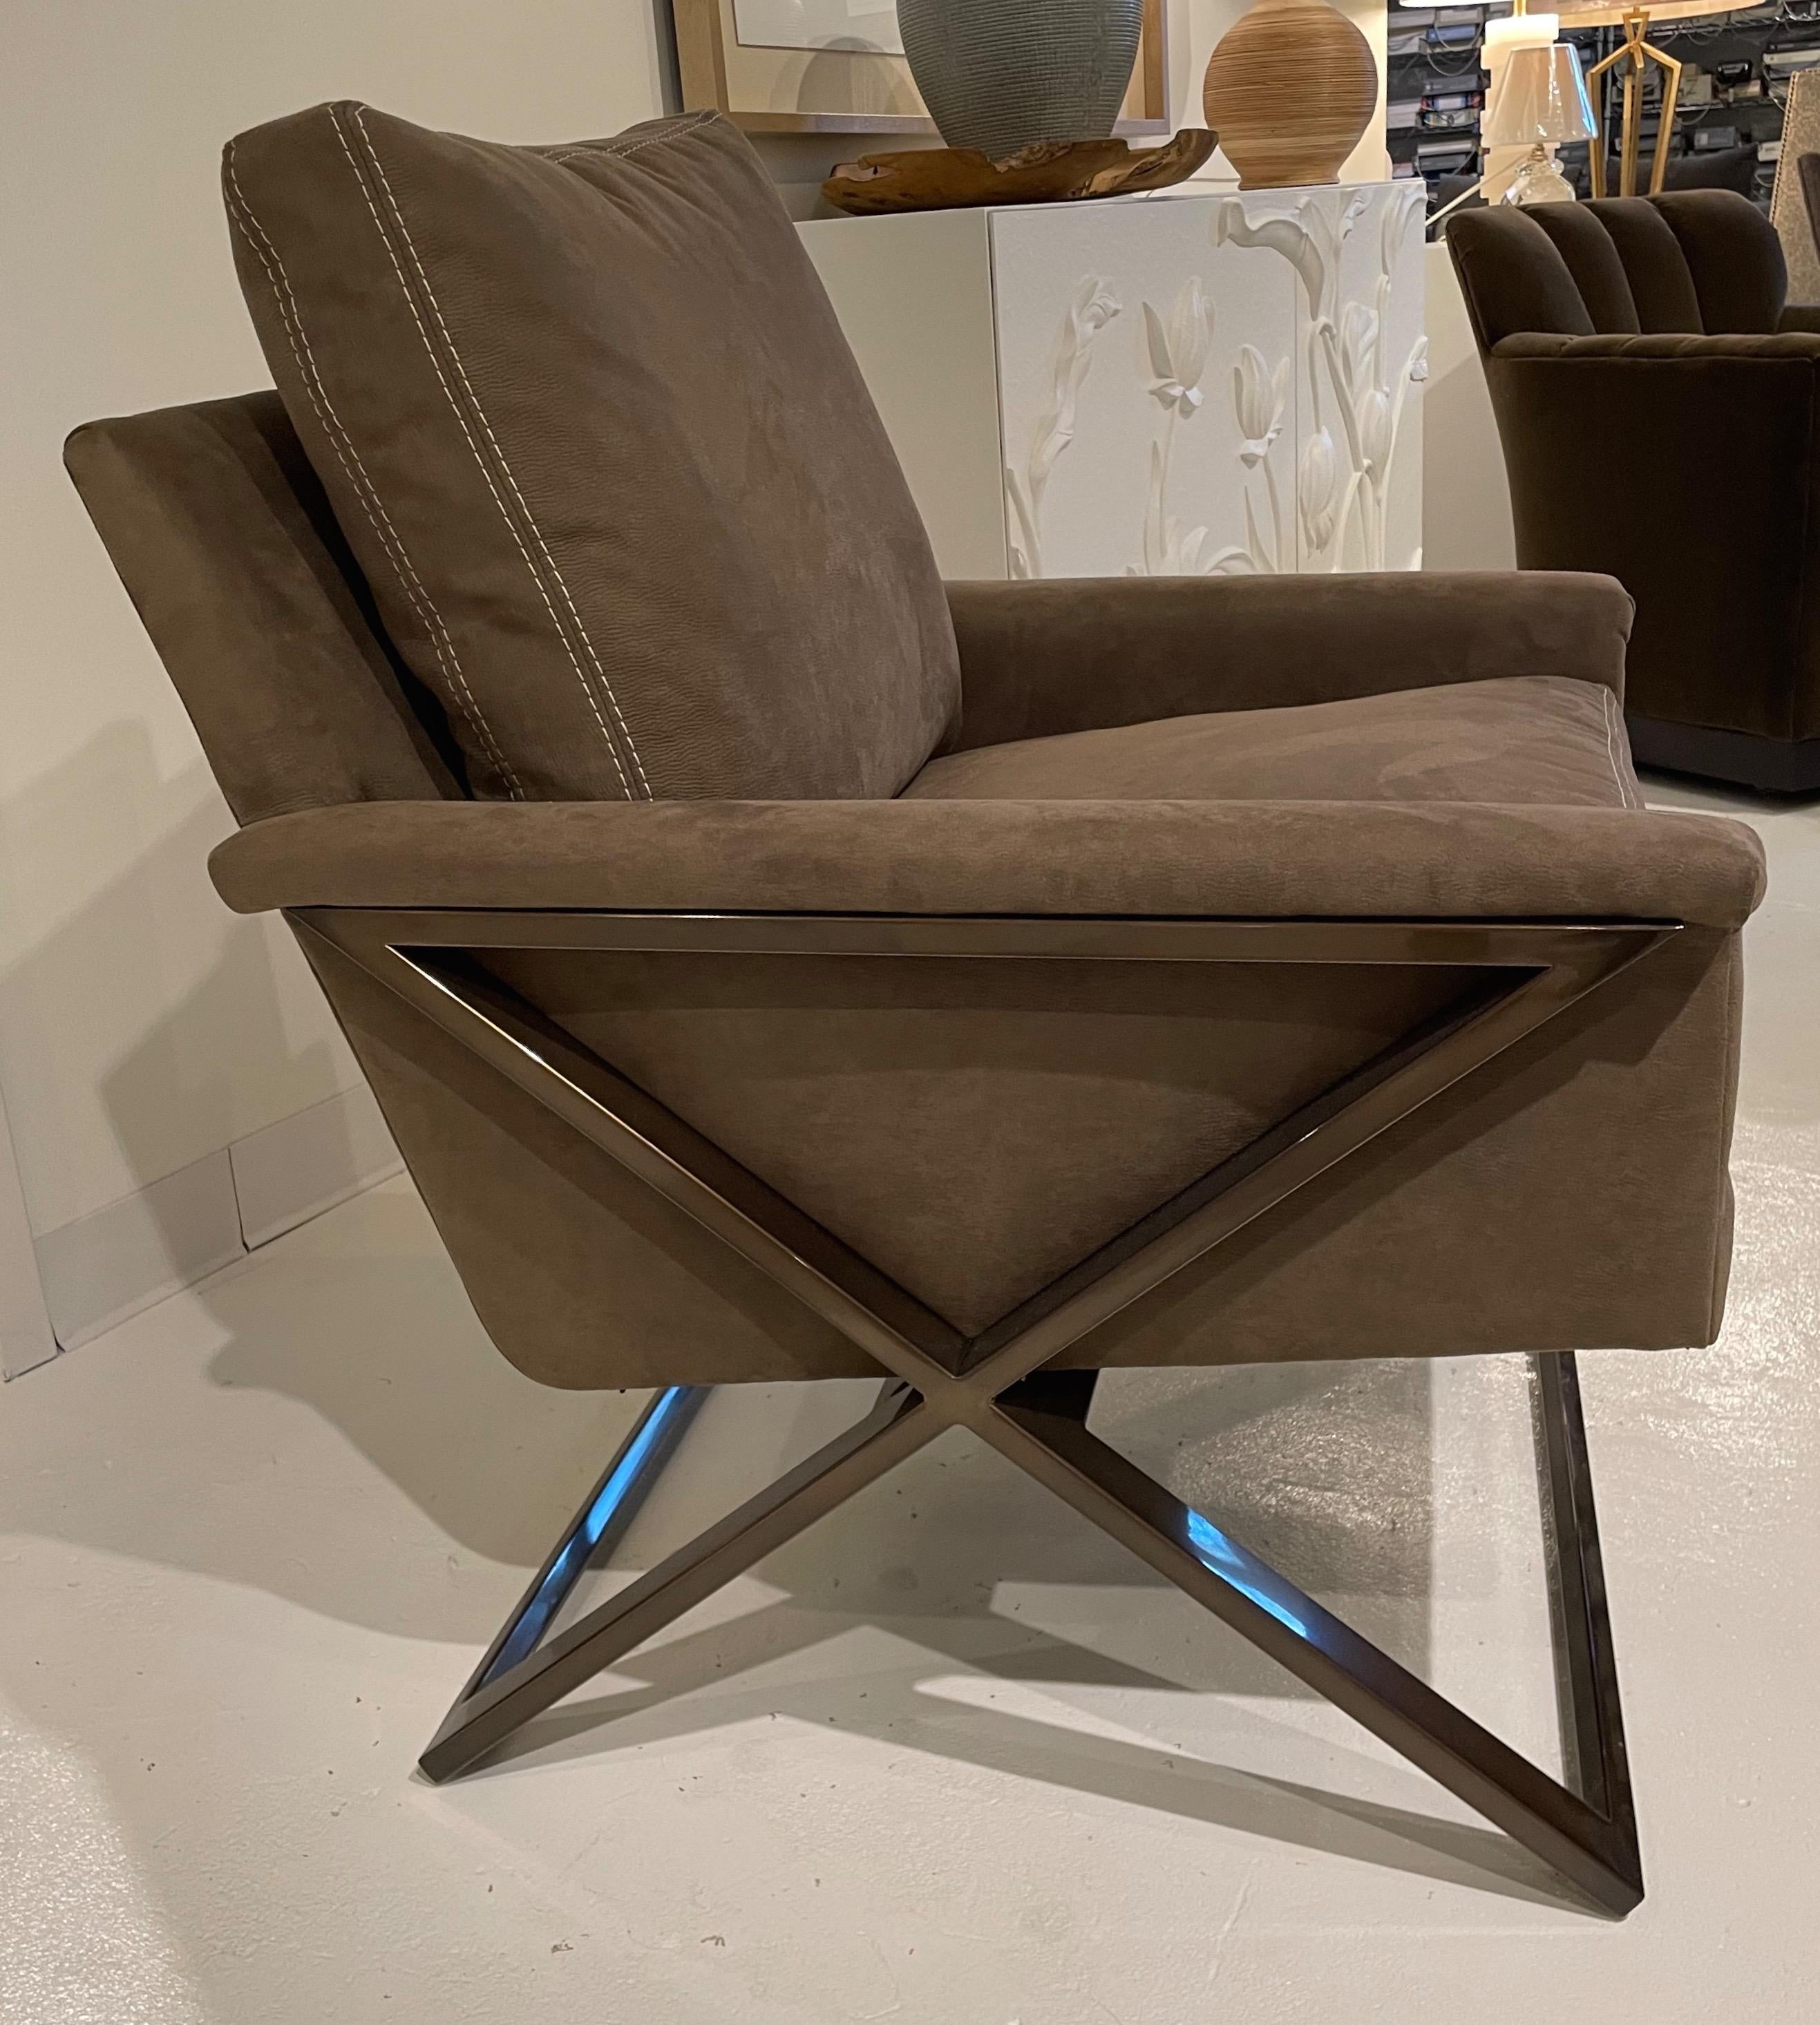 Showroom New - Contemporary - Modern - Transitional Chair with Metal X-Base in a dark bronze finish. Covered in a brown/taupe faux suede that is not only beautiful, but durable and easily cleaned. Spills are not a problem and easily wiped up. French